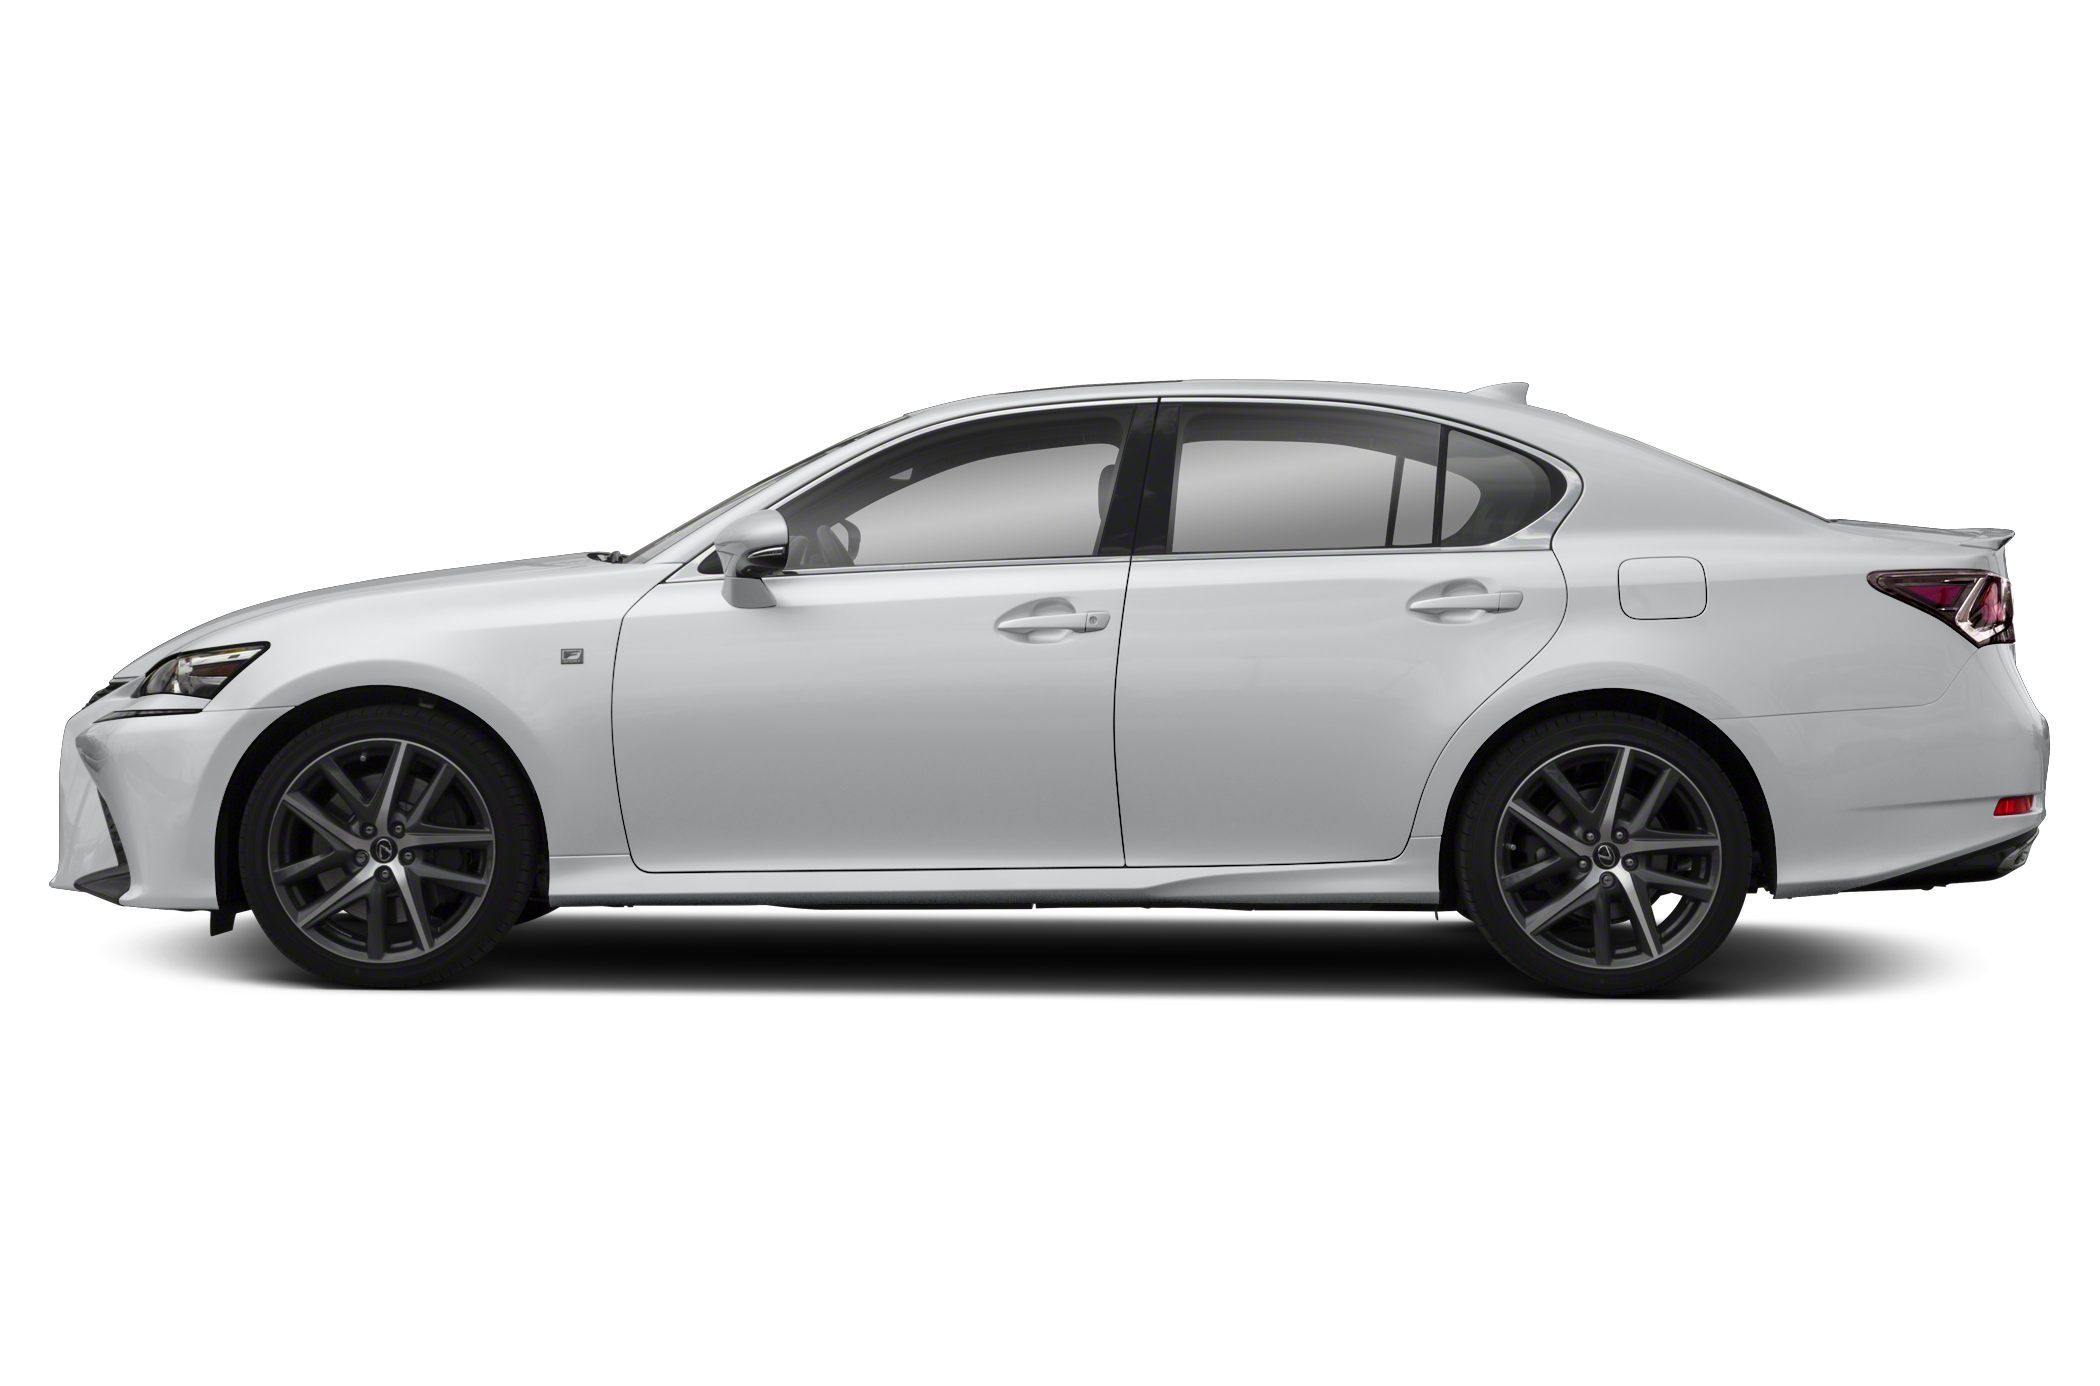 17 Lexus Gs 350 F Sport 4dr All Wheel Drive Sedan Pricing And Options